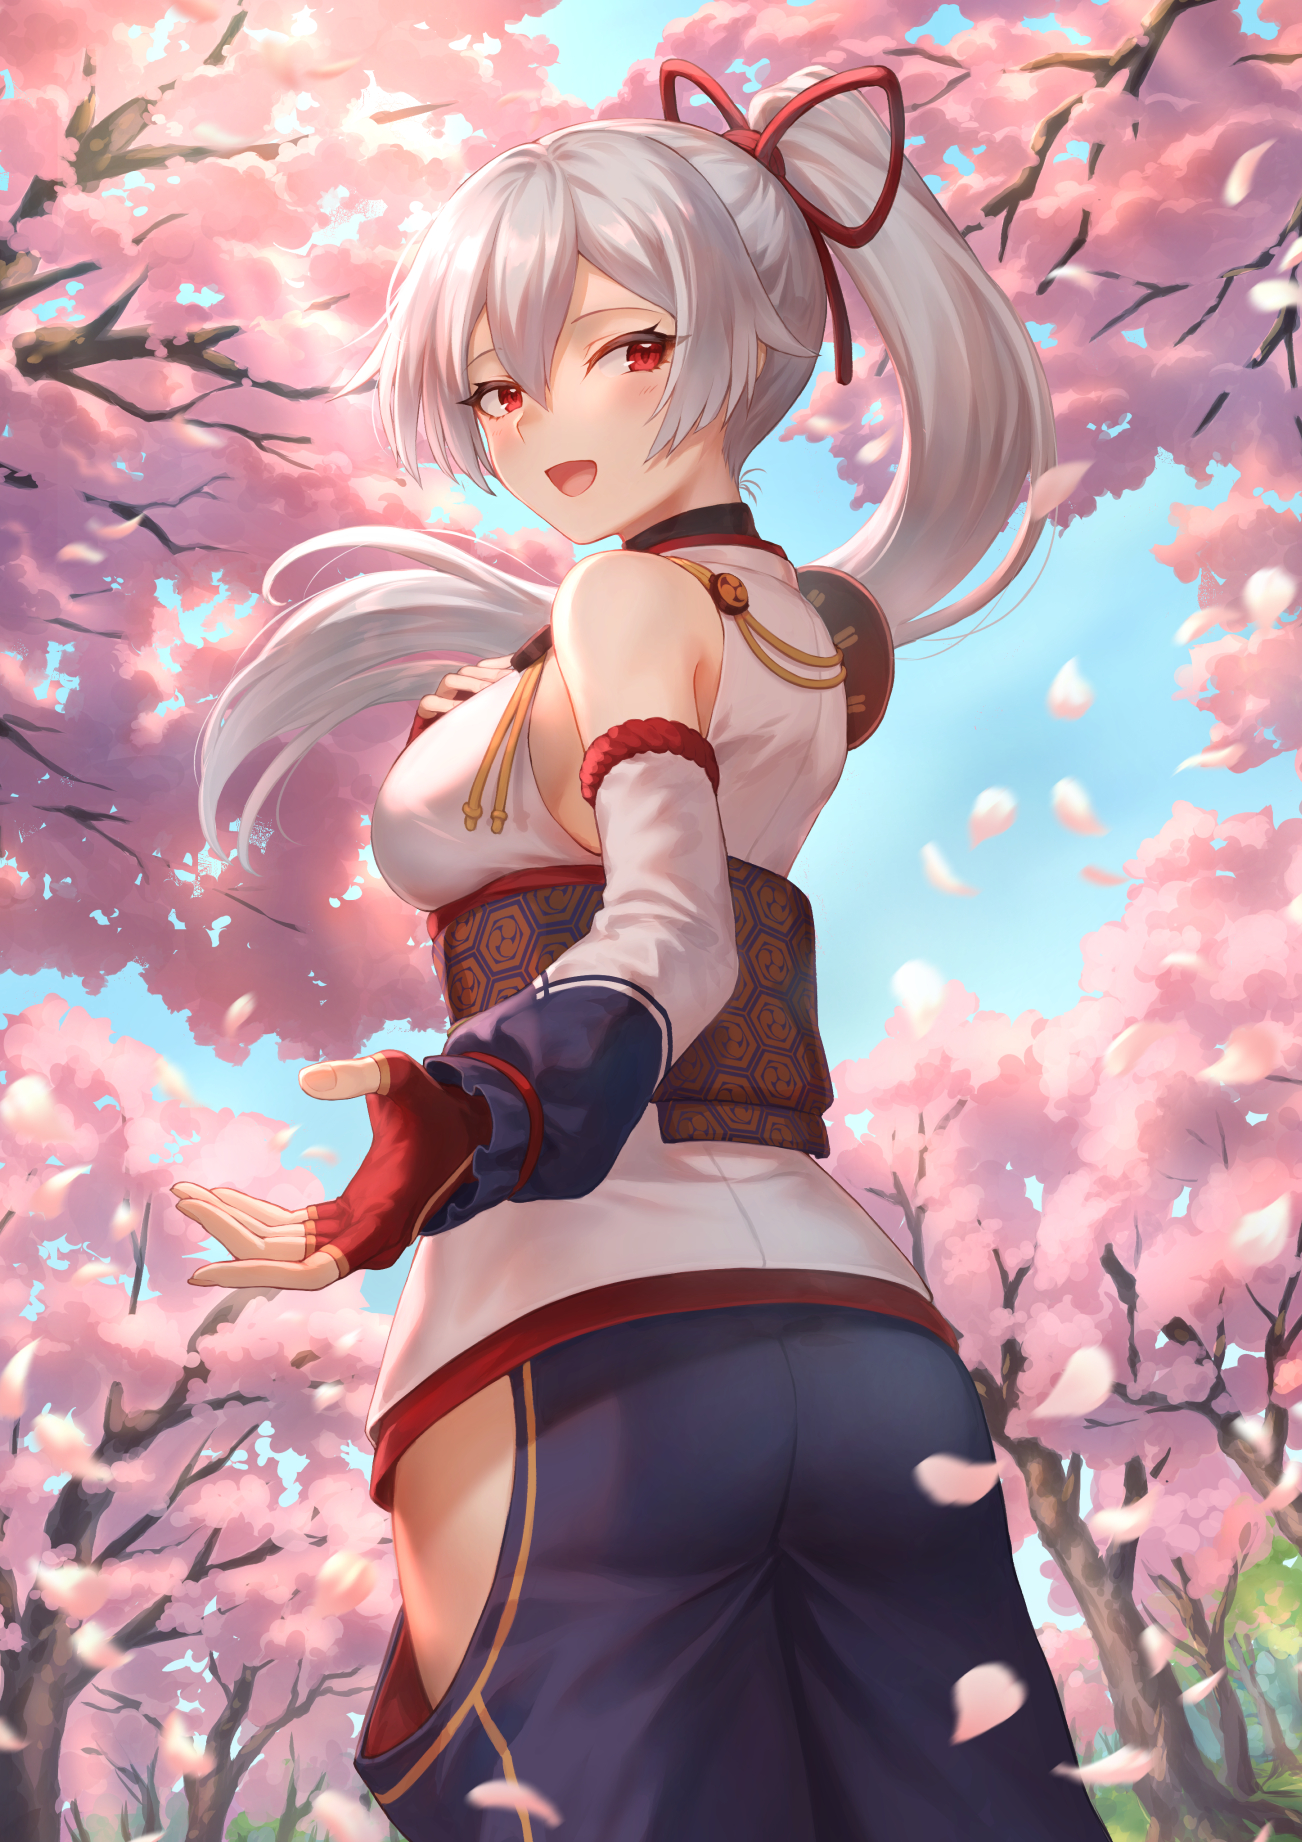 Anime 1302x1842 anime anime girls digital art artwork portrait display Fate/Grand Order Tomoe Gozen (Fate/Grand Order) red eyes open mouth ponytail trees sky silver hair petals cherry blossom Fate series Mashu 003